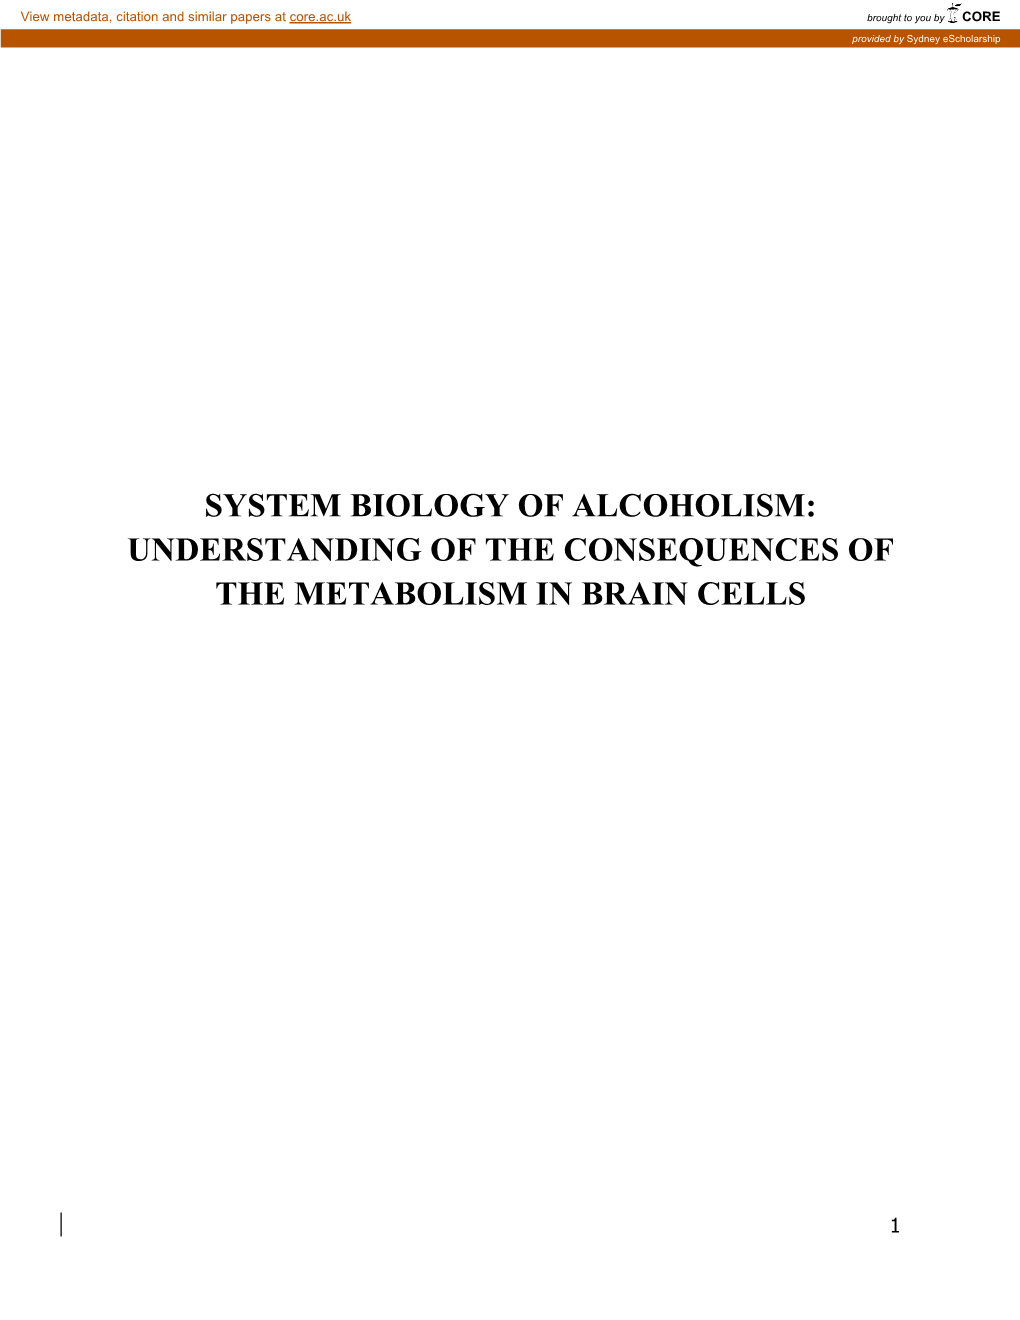 System Biology of Alcoholism: Understanding of the Consequences of the Metabolism in Brain Cells